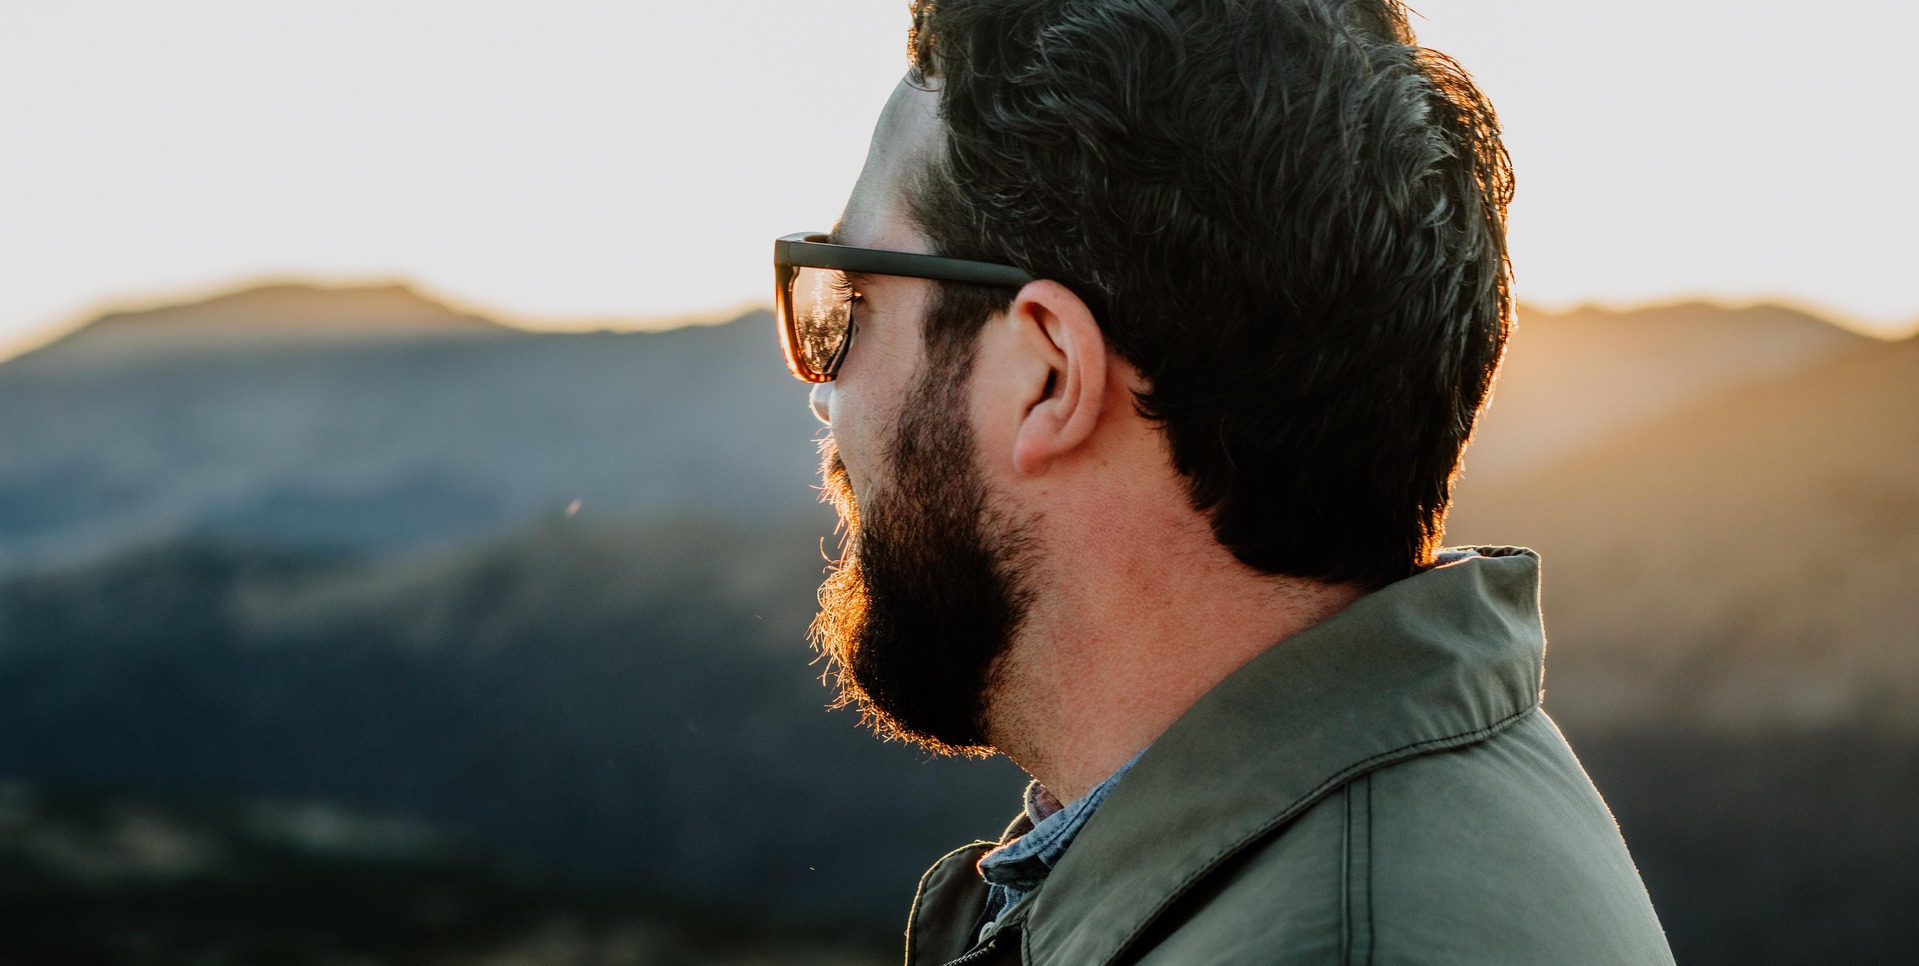 Profile view of man with beard and sunglasses.